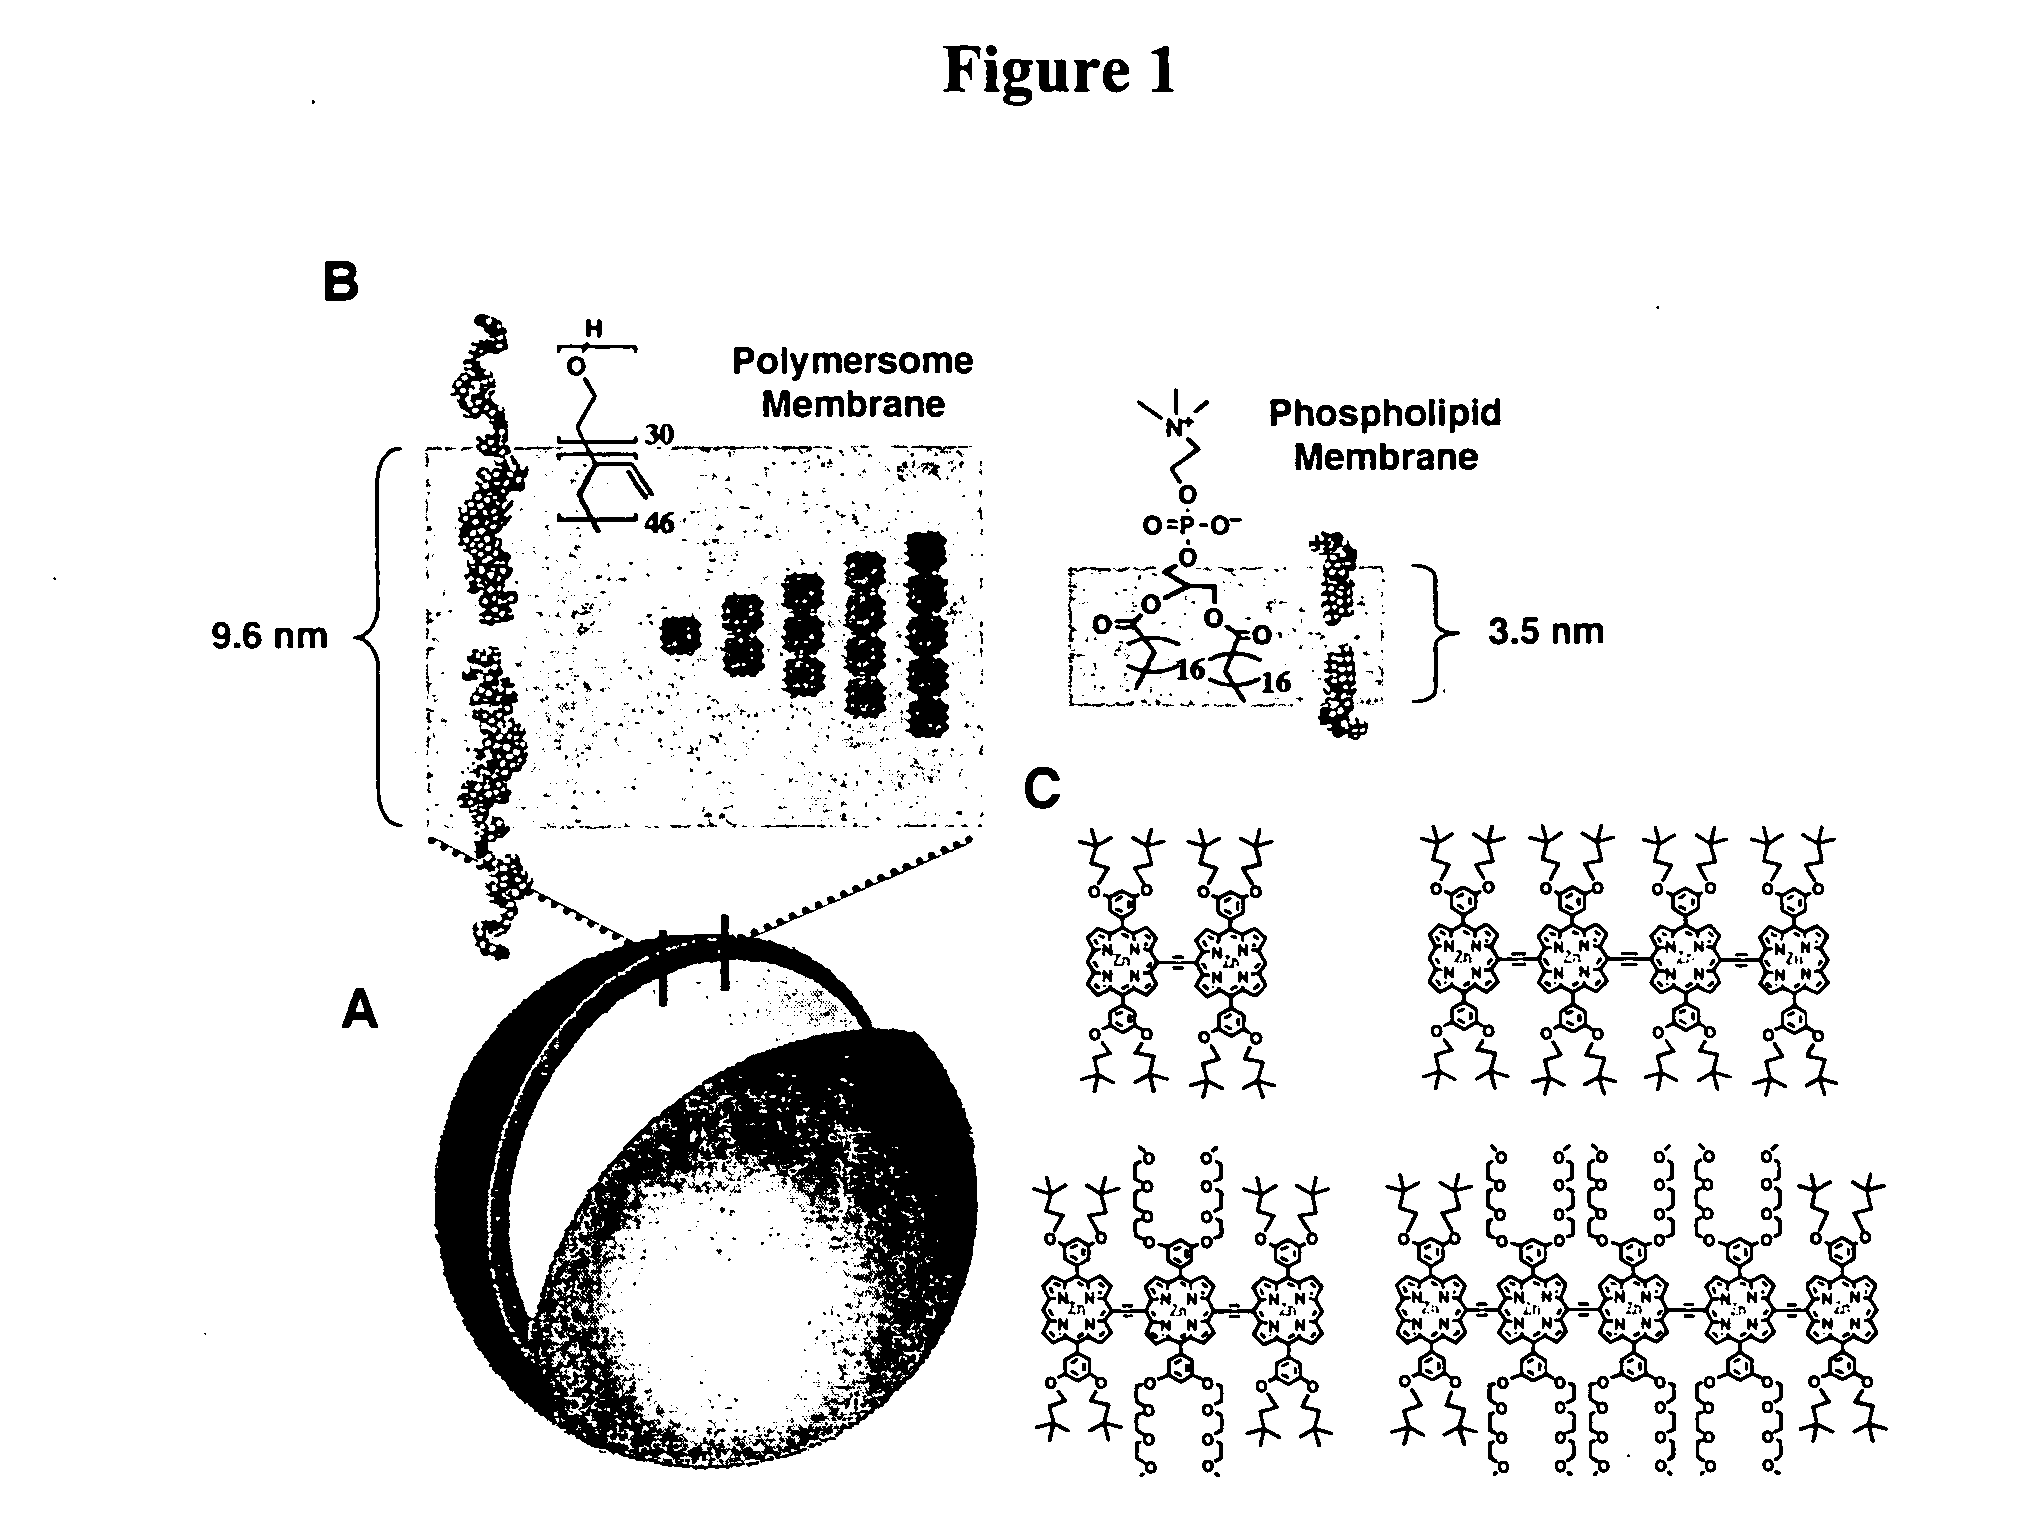 Polymersomes incorporating highly emissive probes